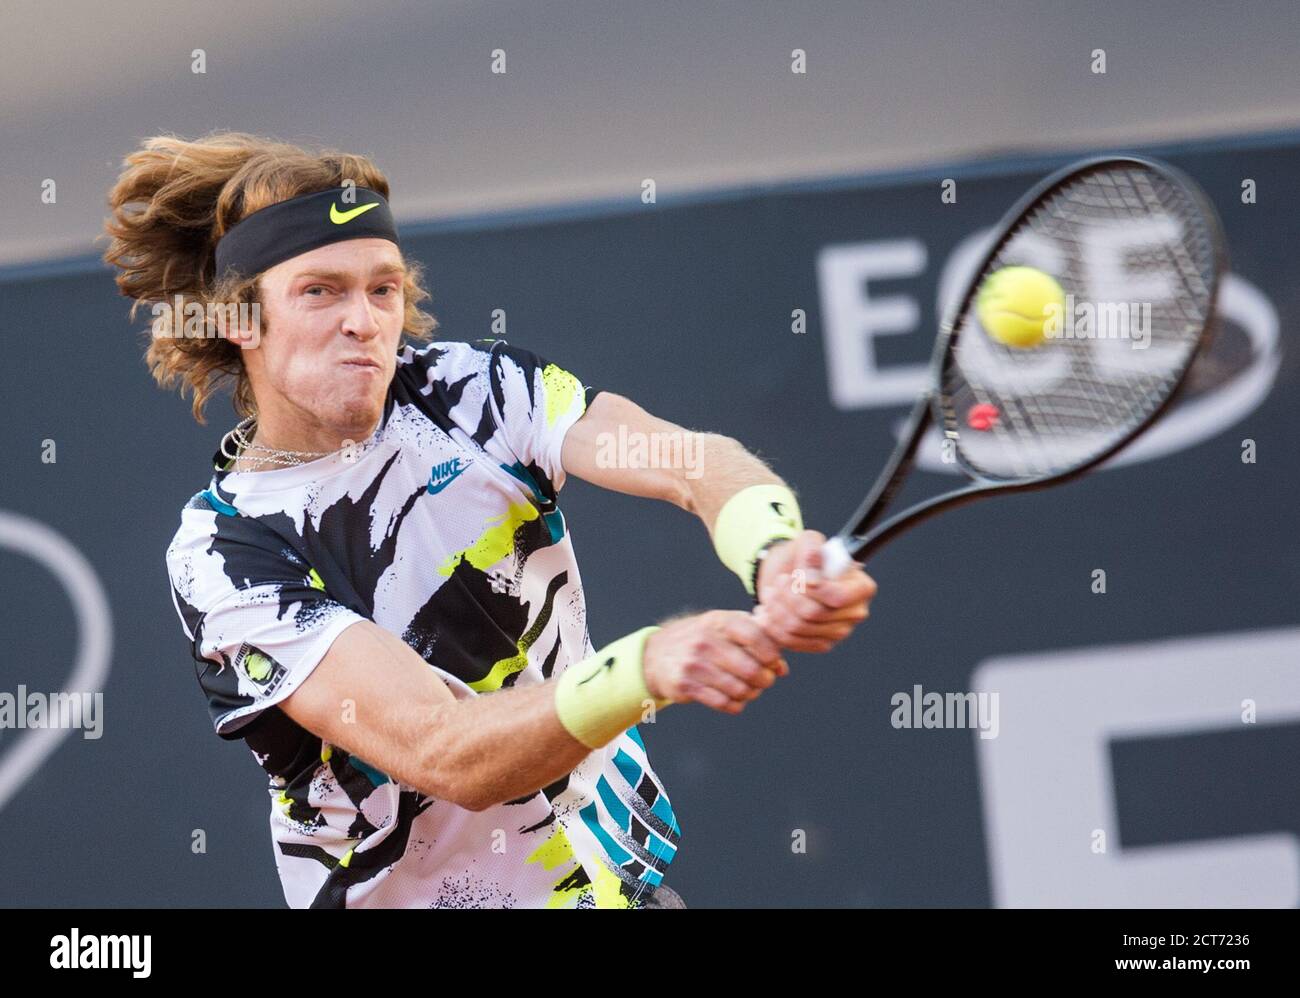 Hamburg, Germany. 21st Sep, 2020. Tennis ATP Tour - German Open, singles,  men, 1st round in the stadium at Rothenbaum. Andrey Rublev from Russia  plays a backhand against Sandgren (USA). Credit: Daniel